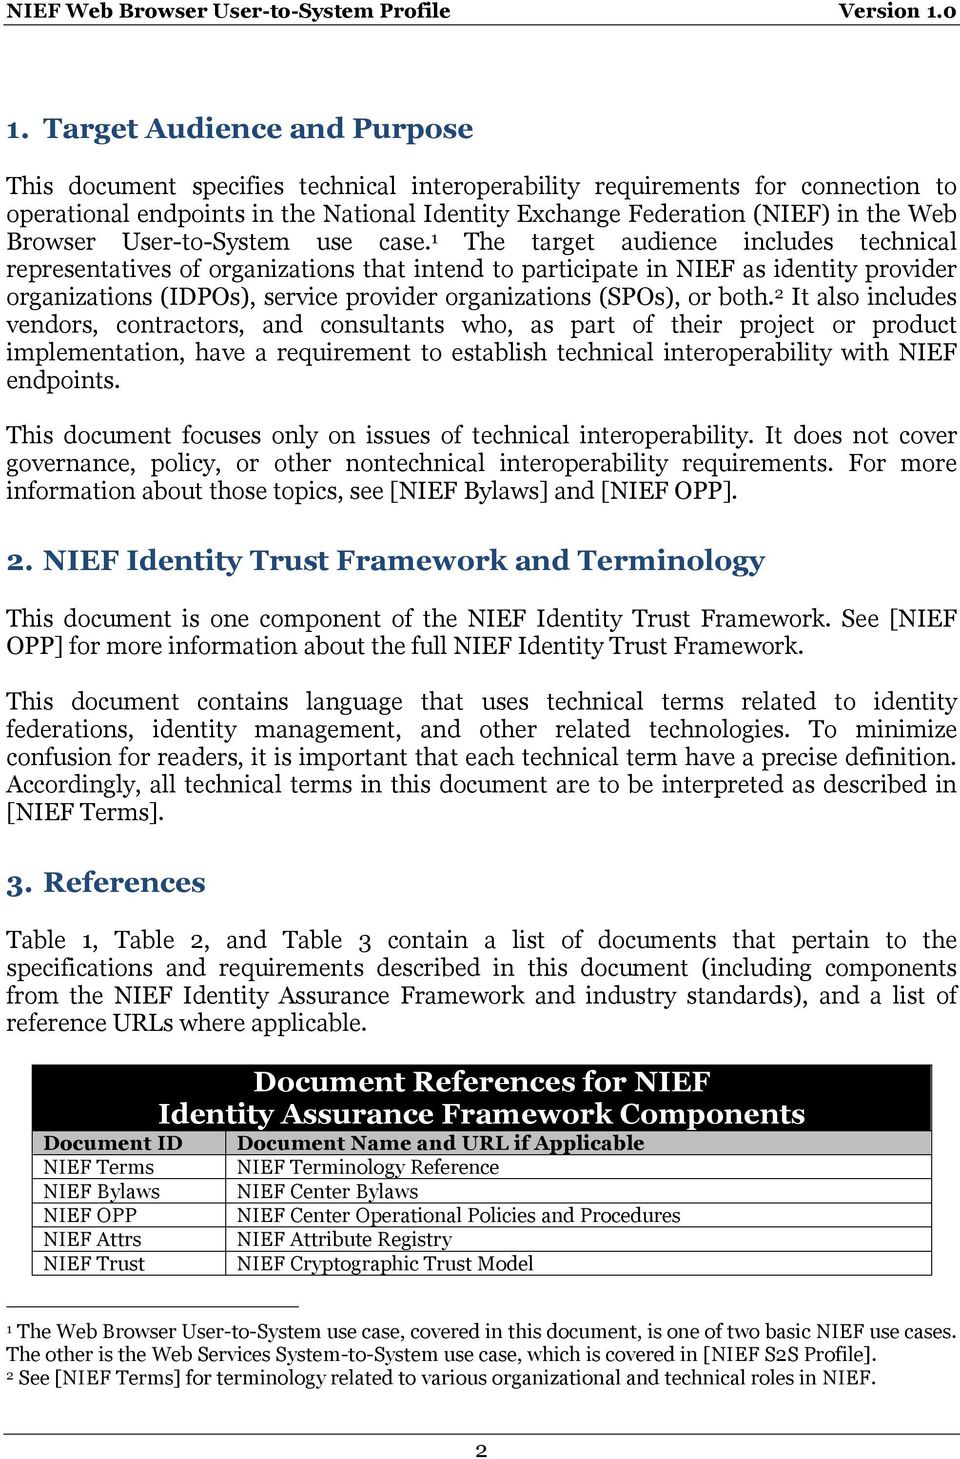 1 The target audience includes technical representatives of organizations that intend to participate in NIEF as identity provider organizations (IDPOs), service provider organizations (SPOs), or both.